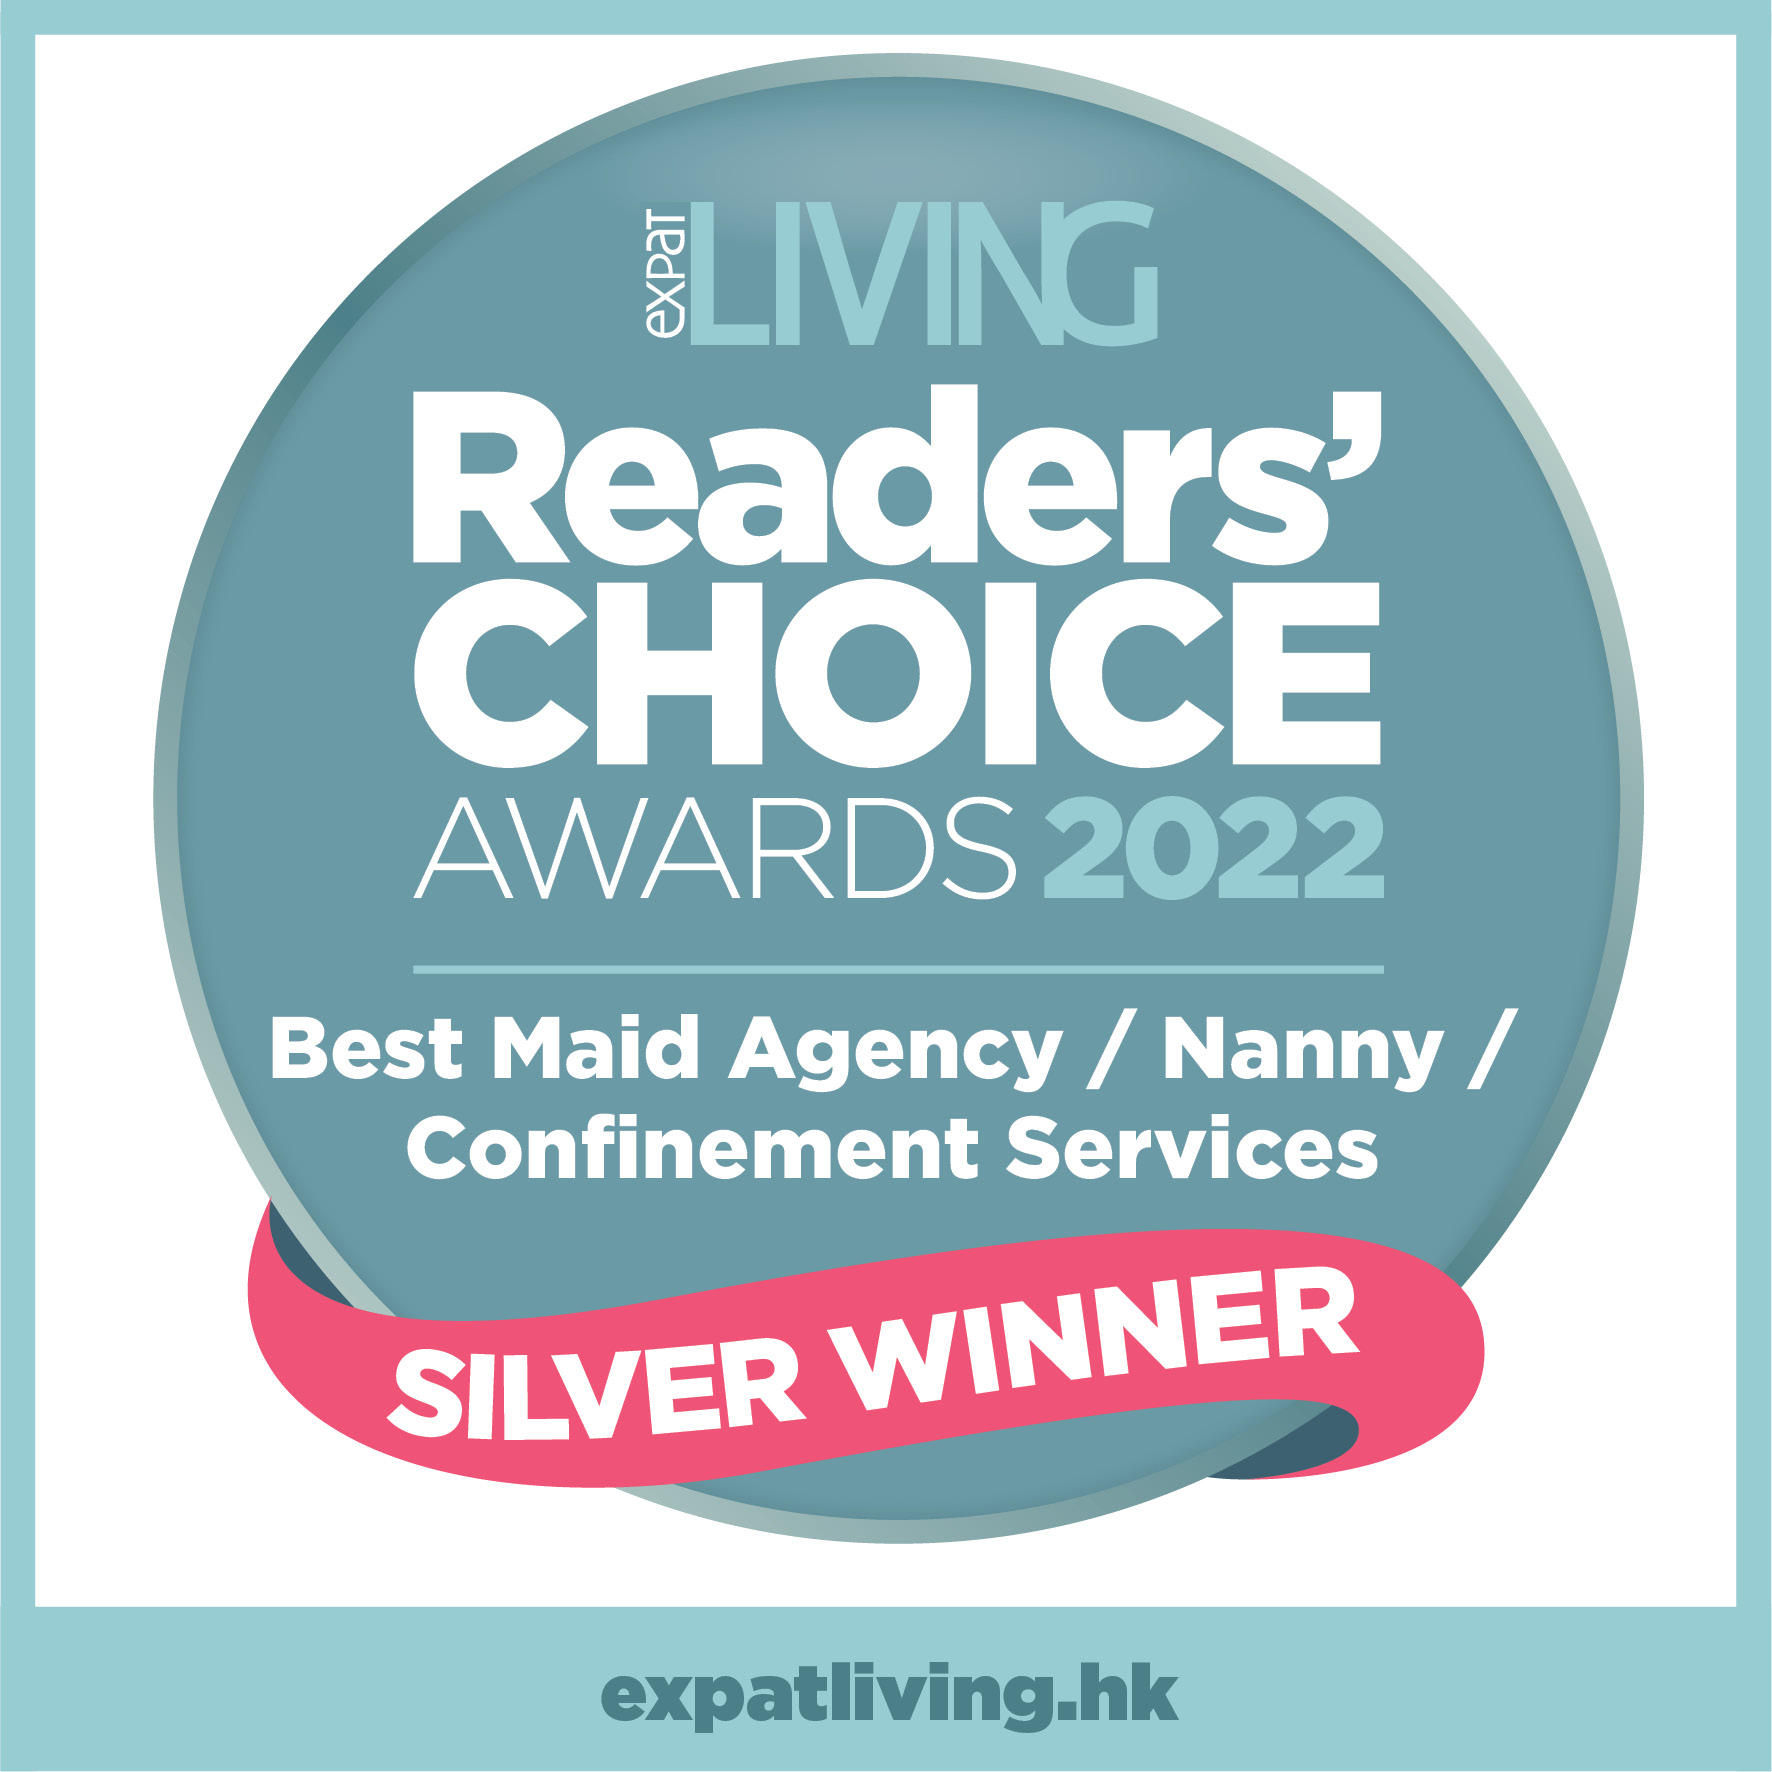 Silver winner of the Reader's Choice Awards 2022 for Employment Agency